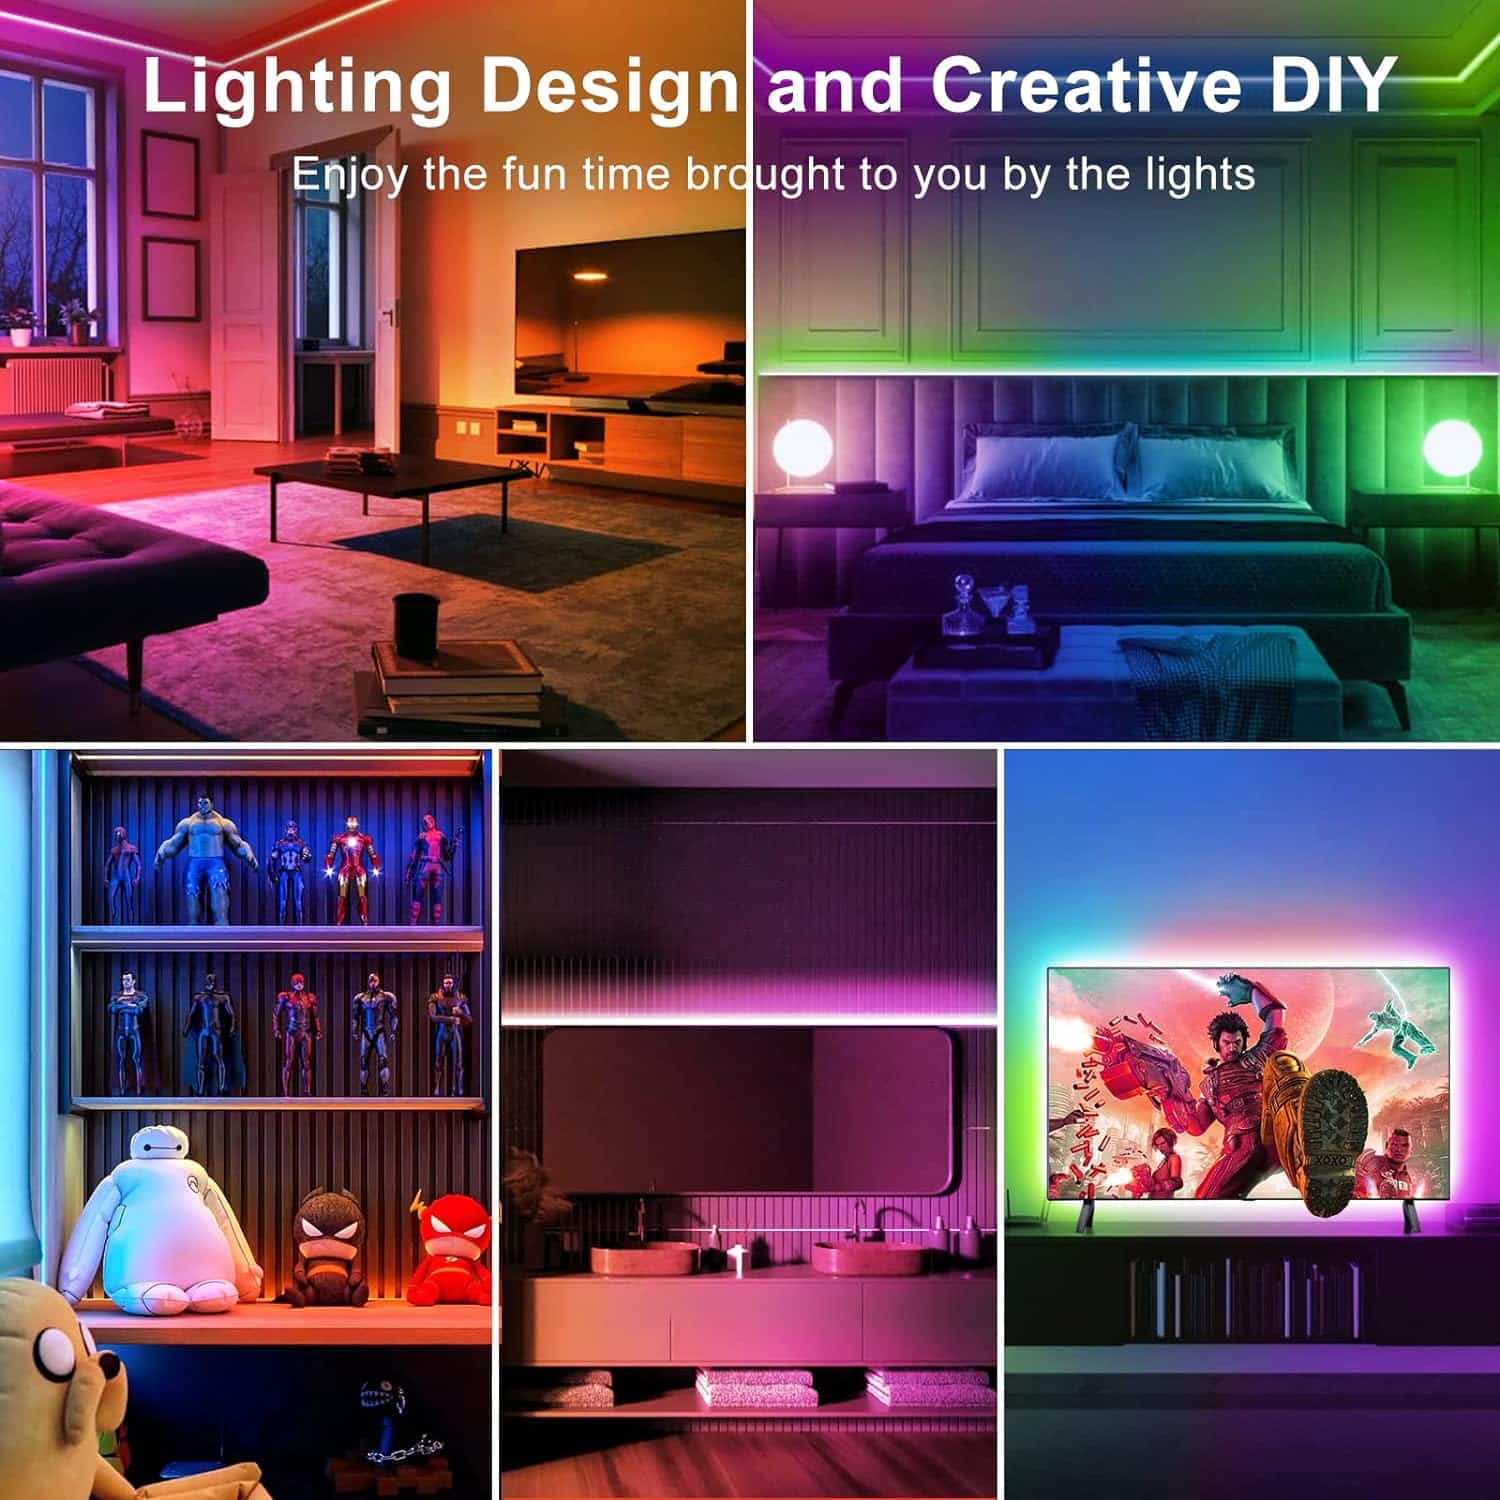 TJOY 100ft Led Lights for Bedroom, Music Sync RGB LED Strip Lights, Bluetooth Led Light Strip with APP and Remote Control, Color Changing Rope Lights, LED Tape Light for Teen, Room Decor/50ft *2